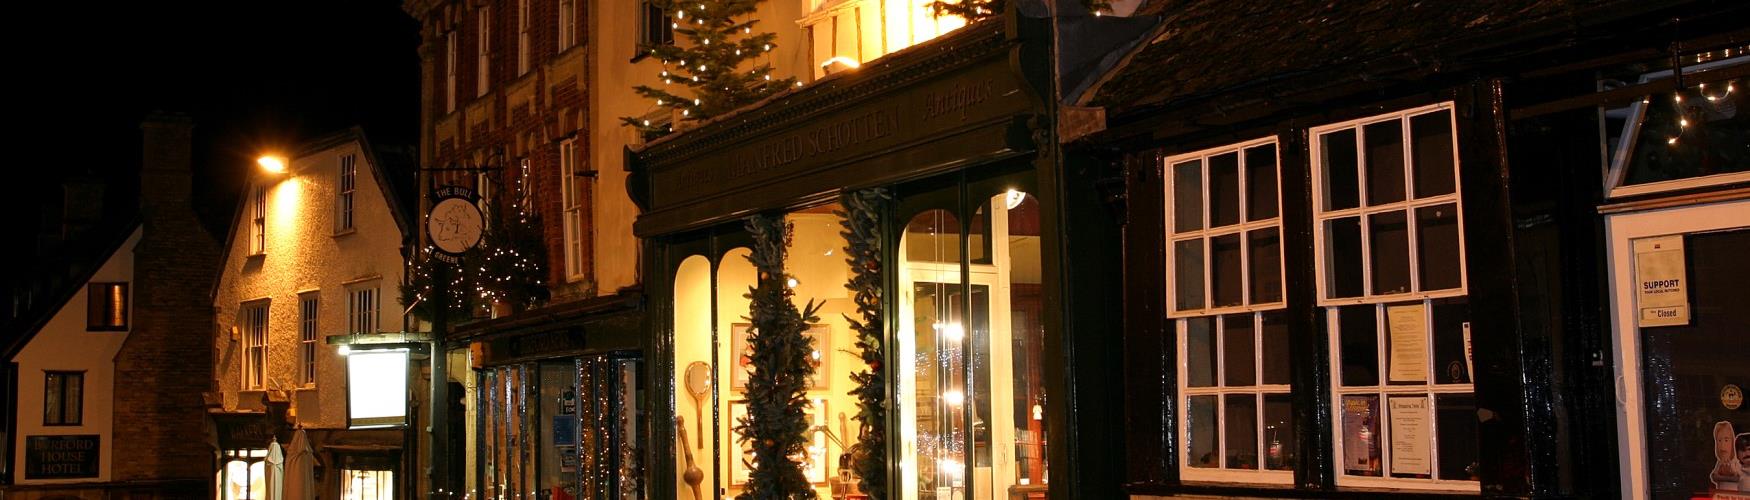 Burford shops decorated for Christmas